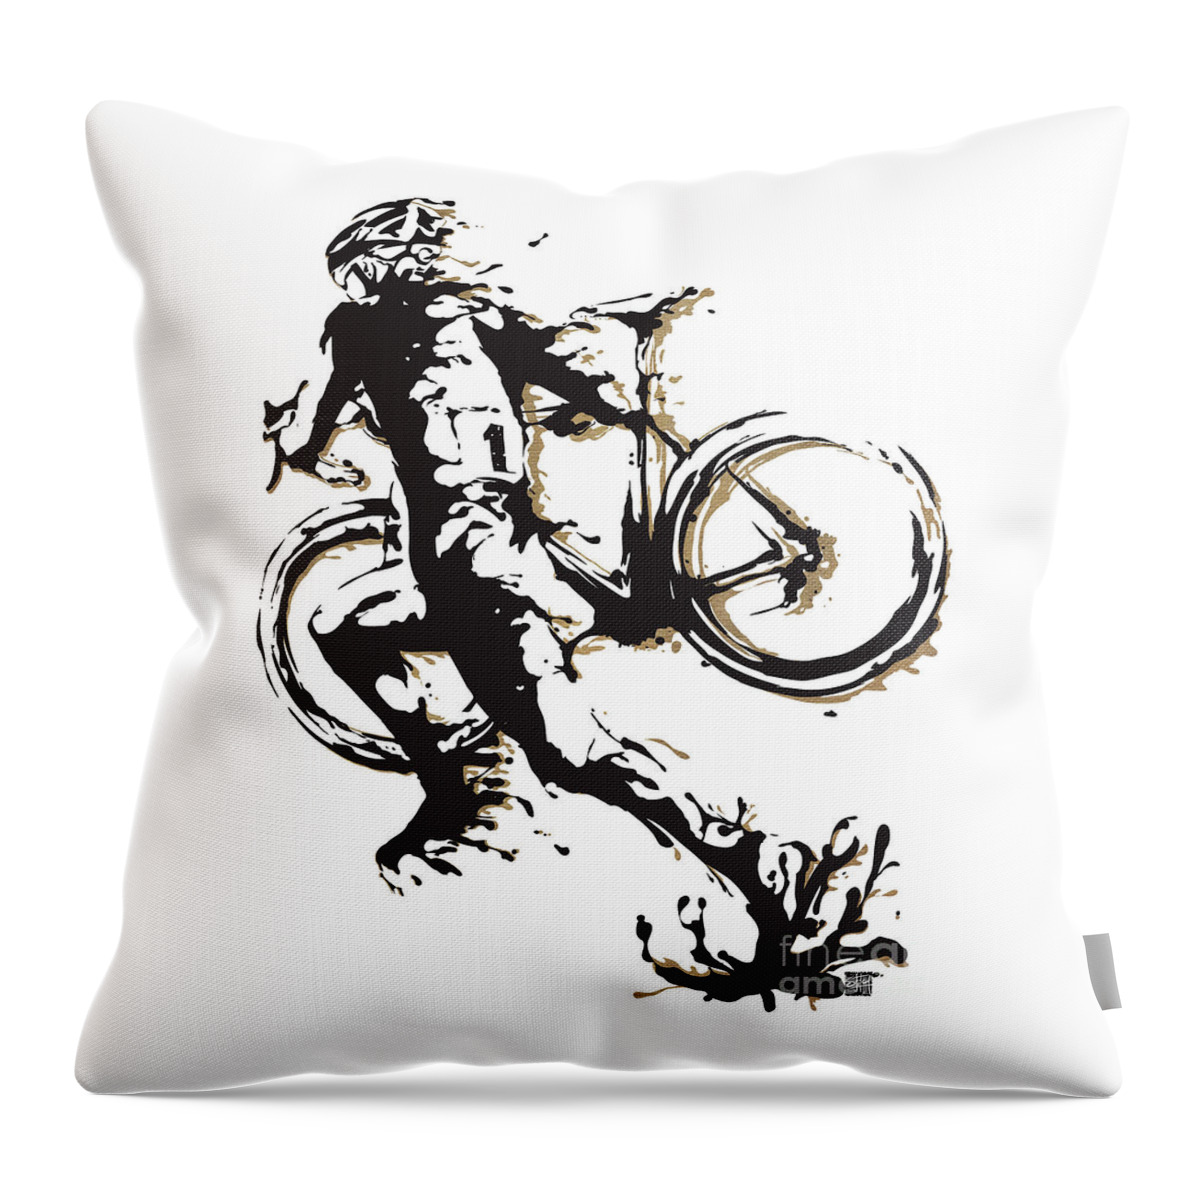 Cyclocross Throw Pillow featuring the painting Cyclocross Poster1 by Sassan Filsoof